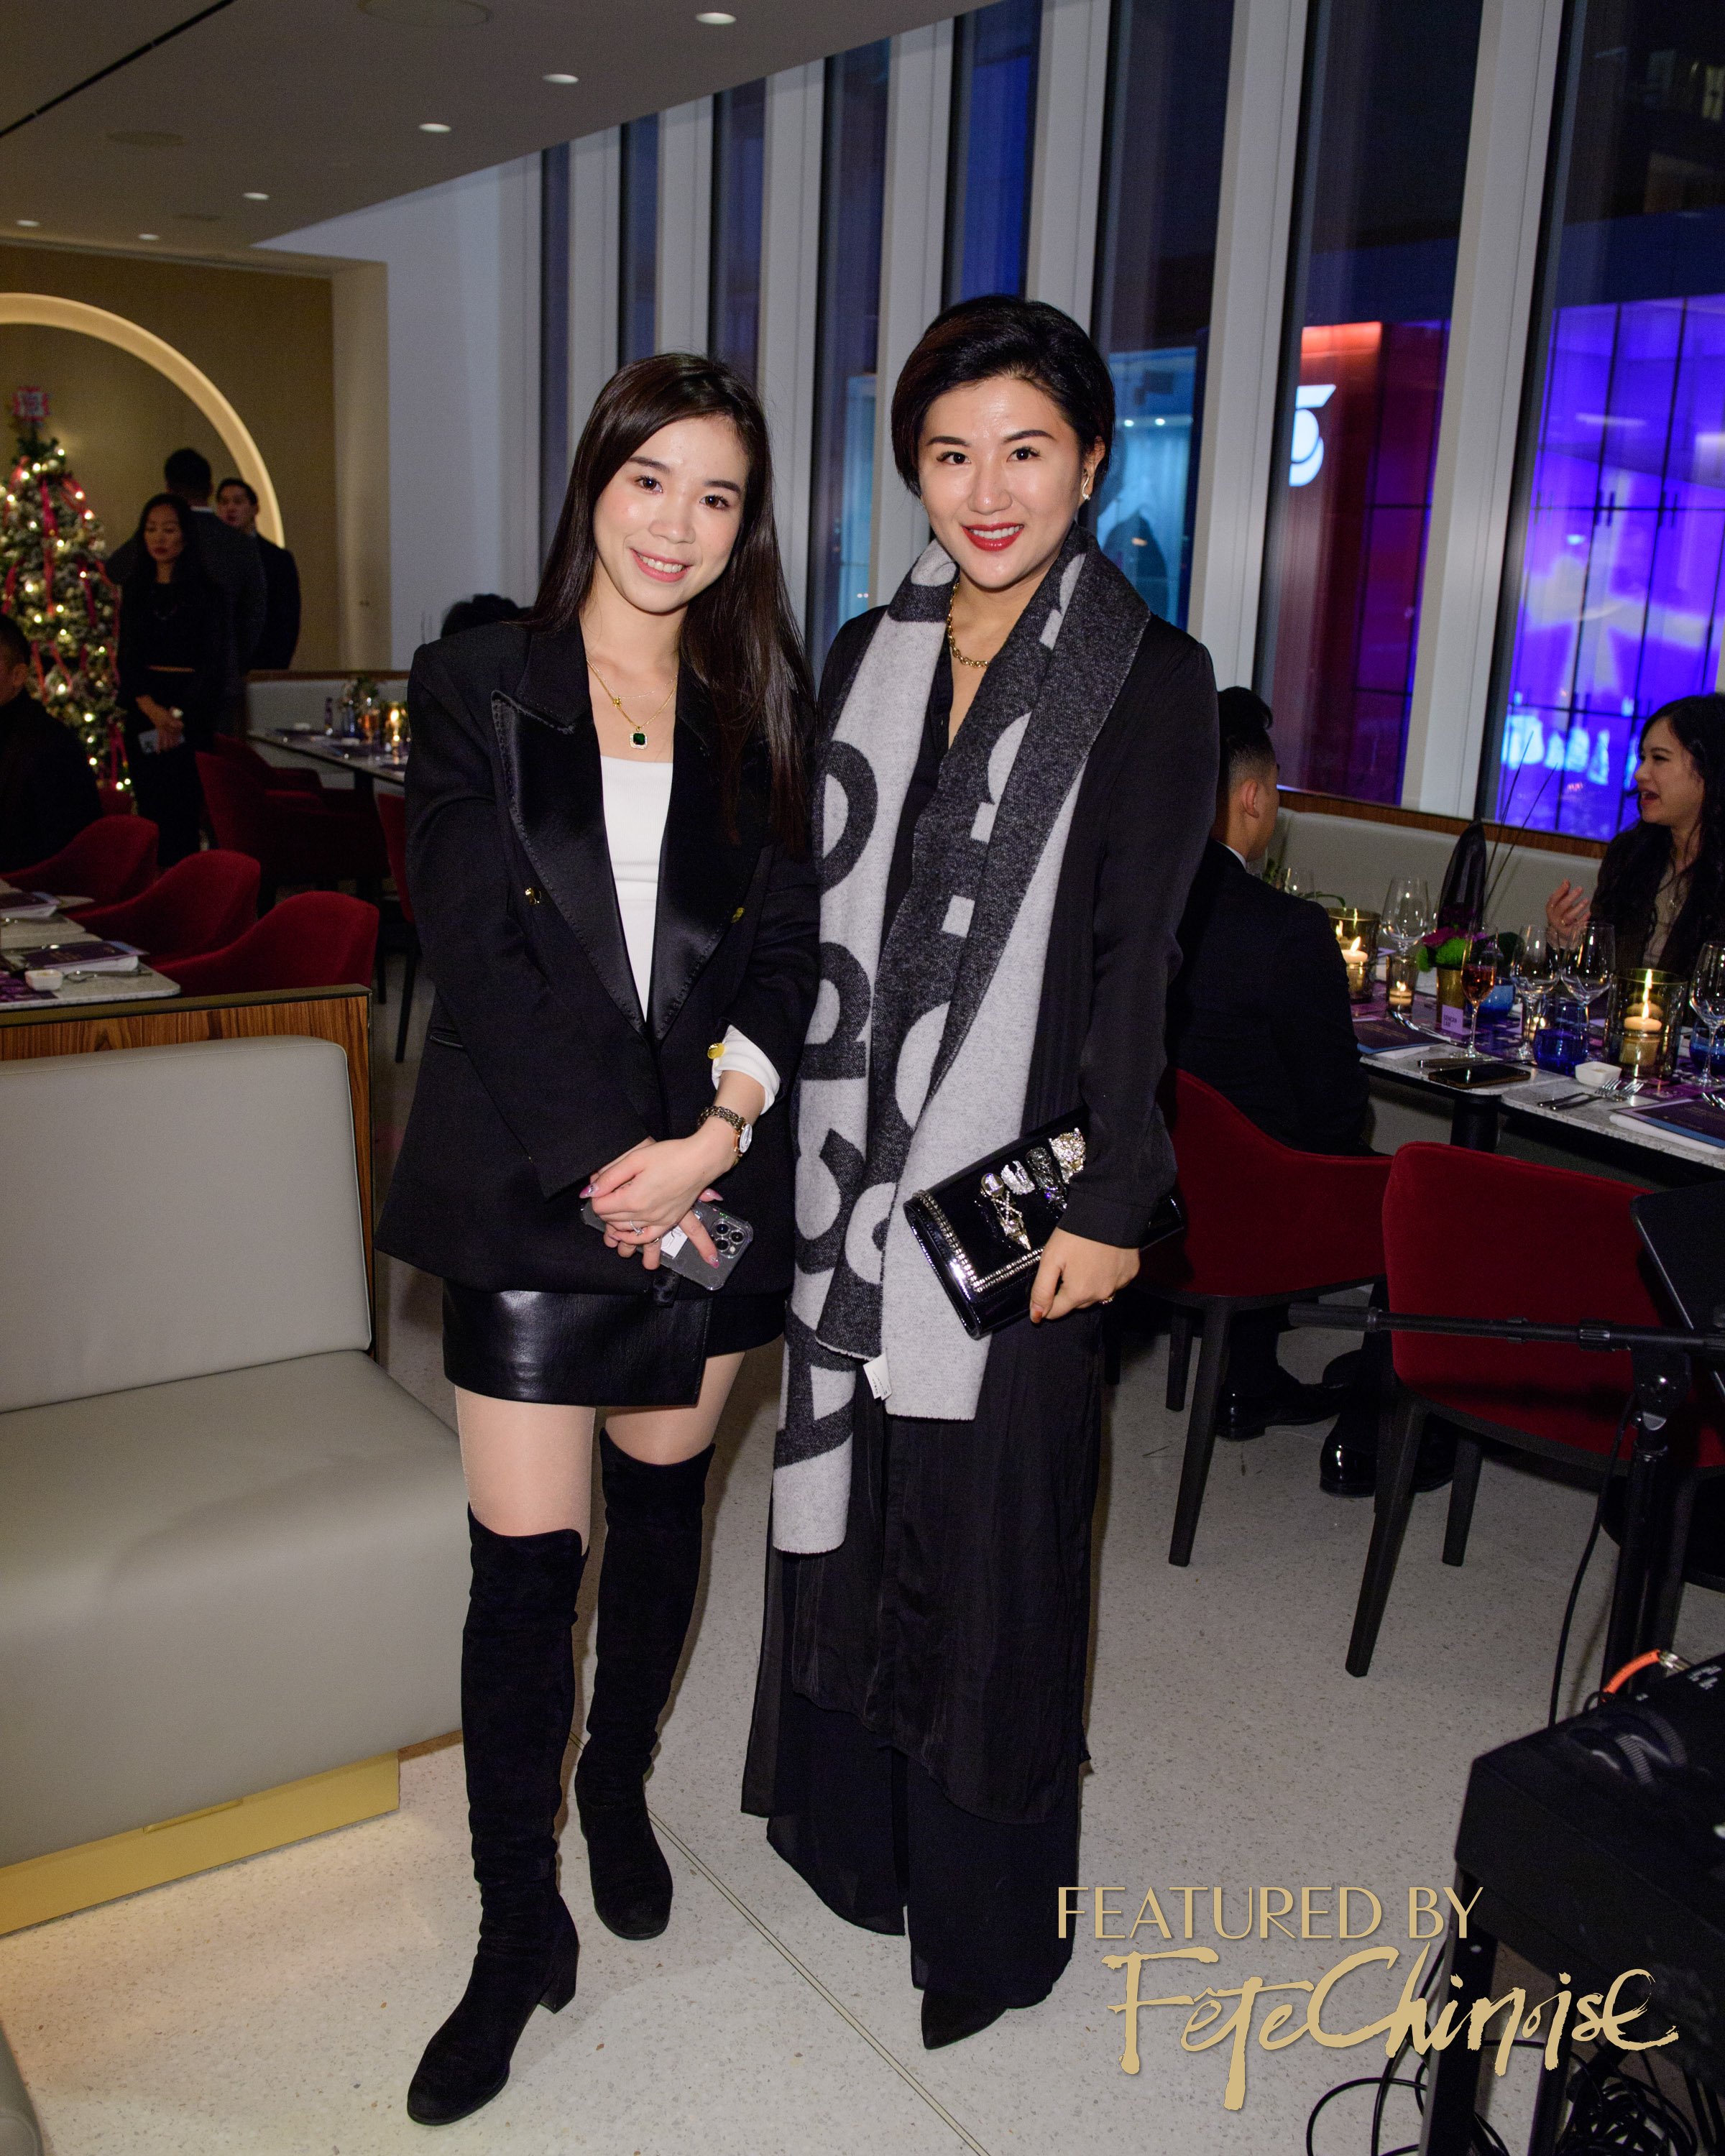 Fete-Chionise-Magaine-edition7-launch-party-holt-renfrew-photography-release-139.jpg